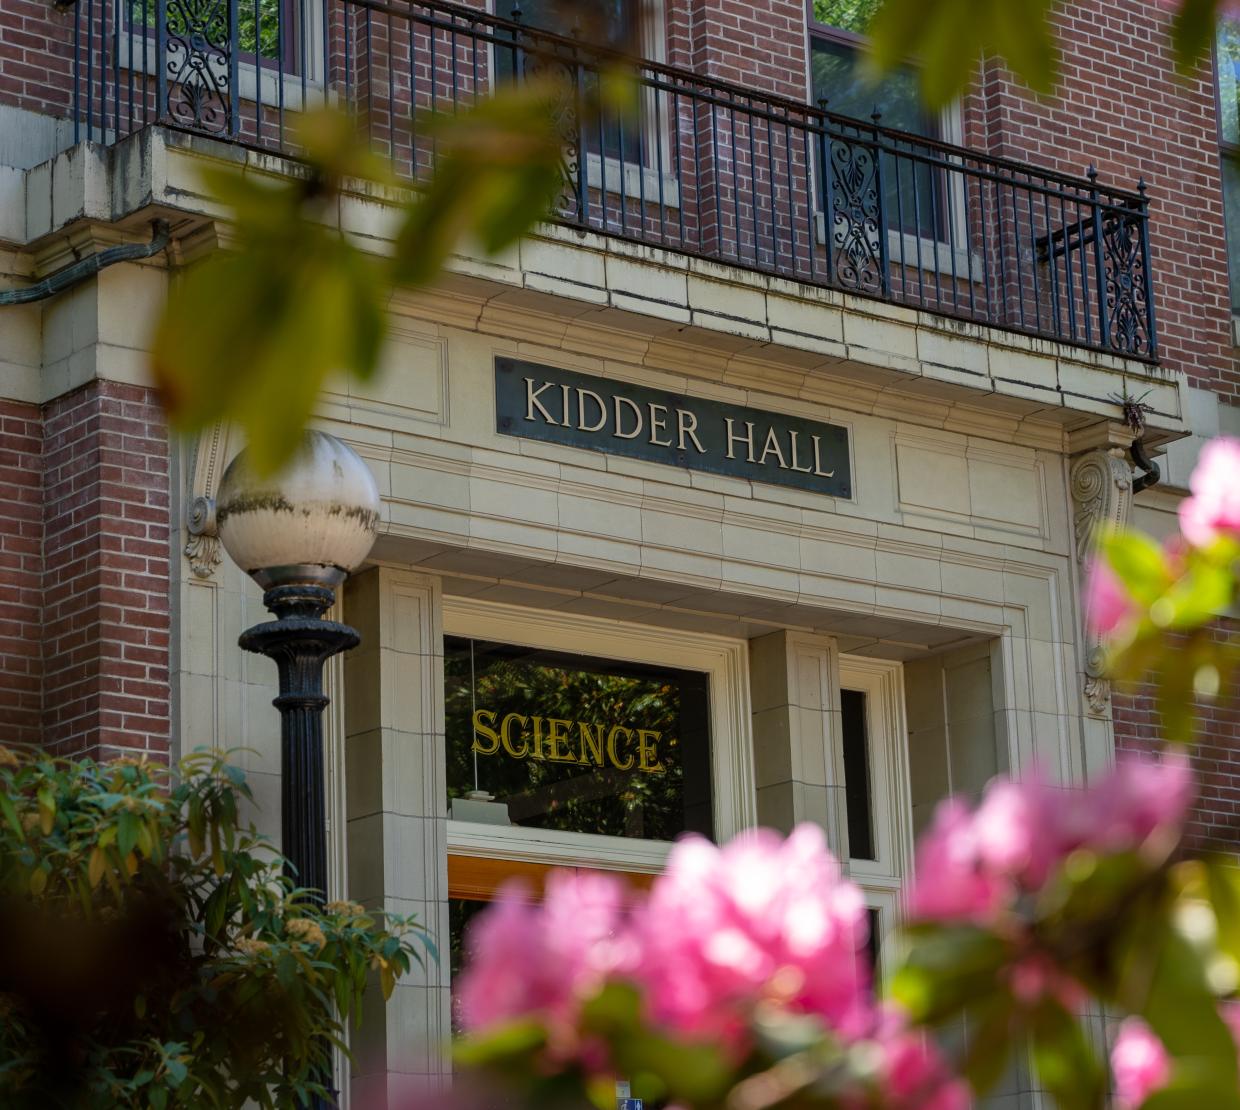 Photo of Kidder Hall from a low angle looking at a door with science written in the glass above the door, and Kidder Hall written in the stone above the glass. Blurred pink flowers appear in the foreground.